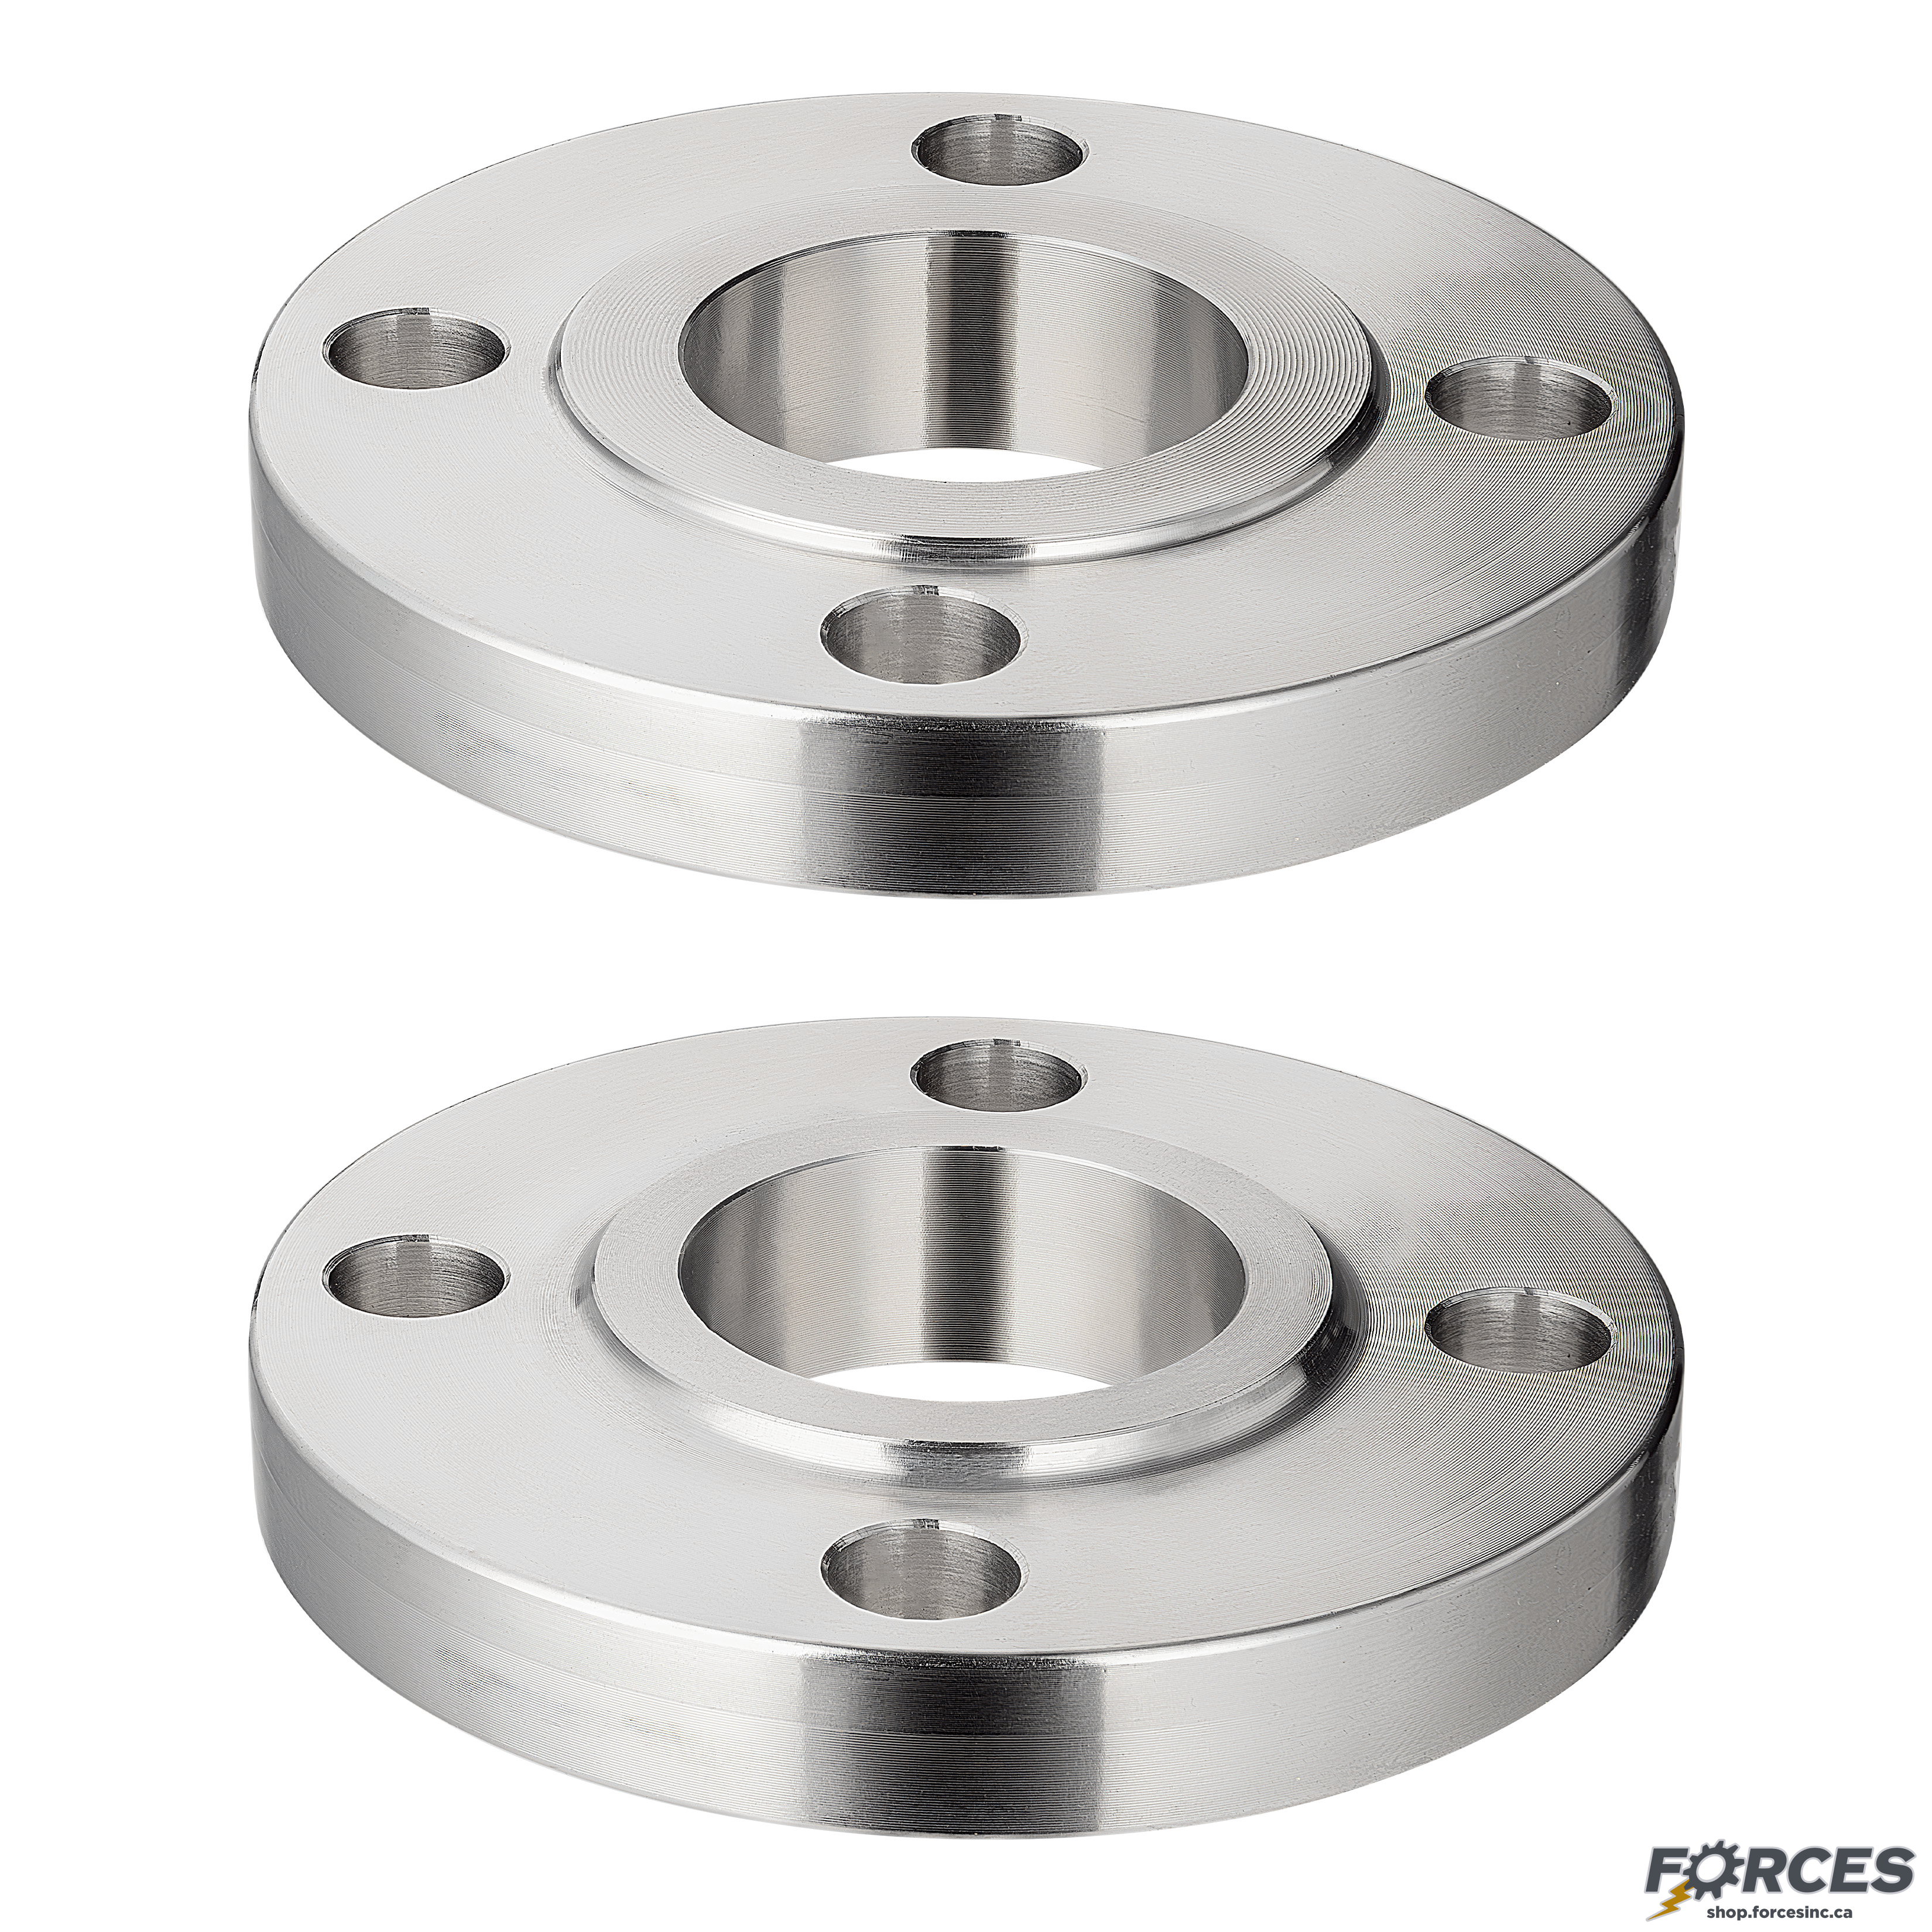 2" Slip-On Flange Class #150 - Stainless Steel 304 - Forces Inc